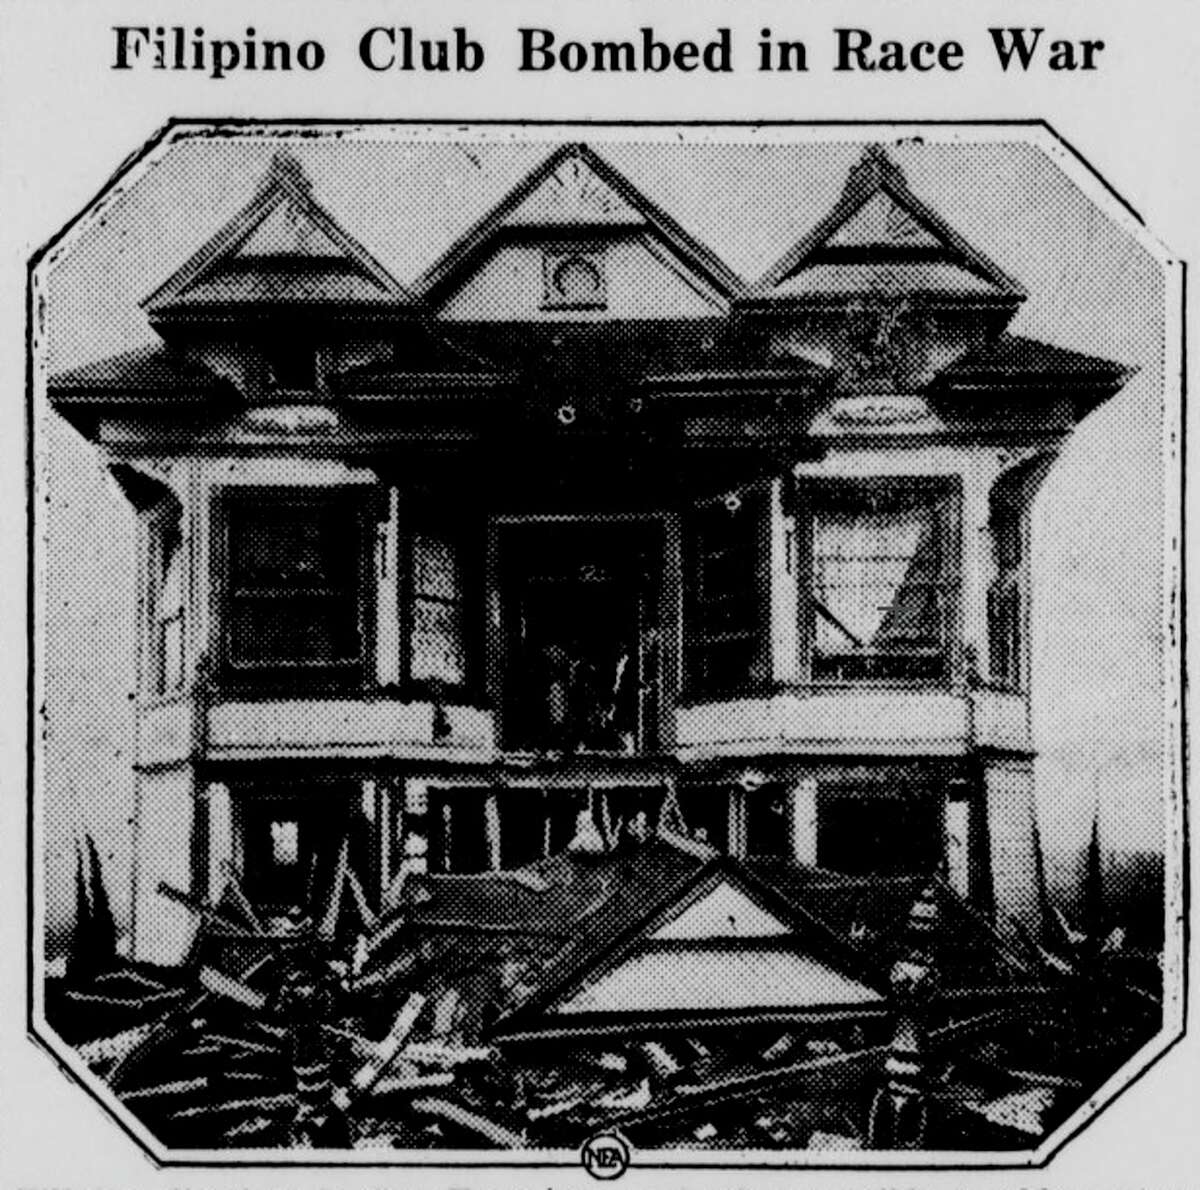 A photo published in a Healdsburg Tribune issue from 1930, showing the wreckage from the FFA headquarters.